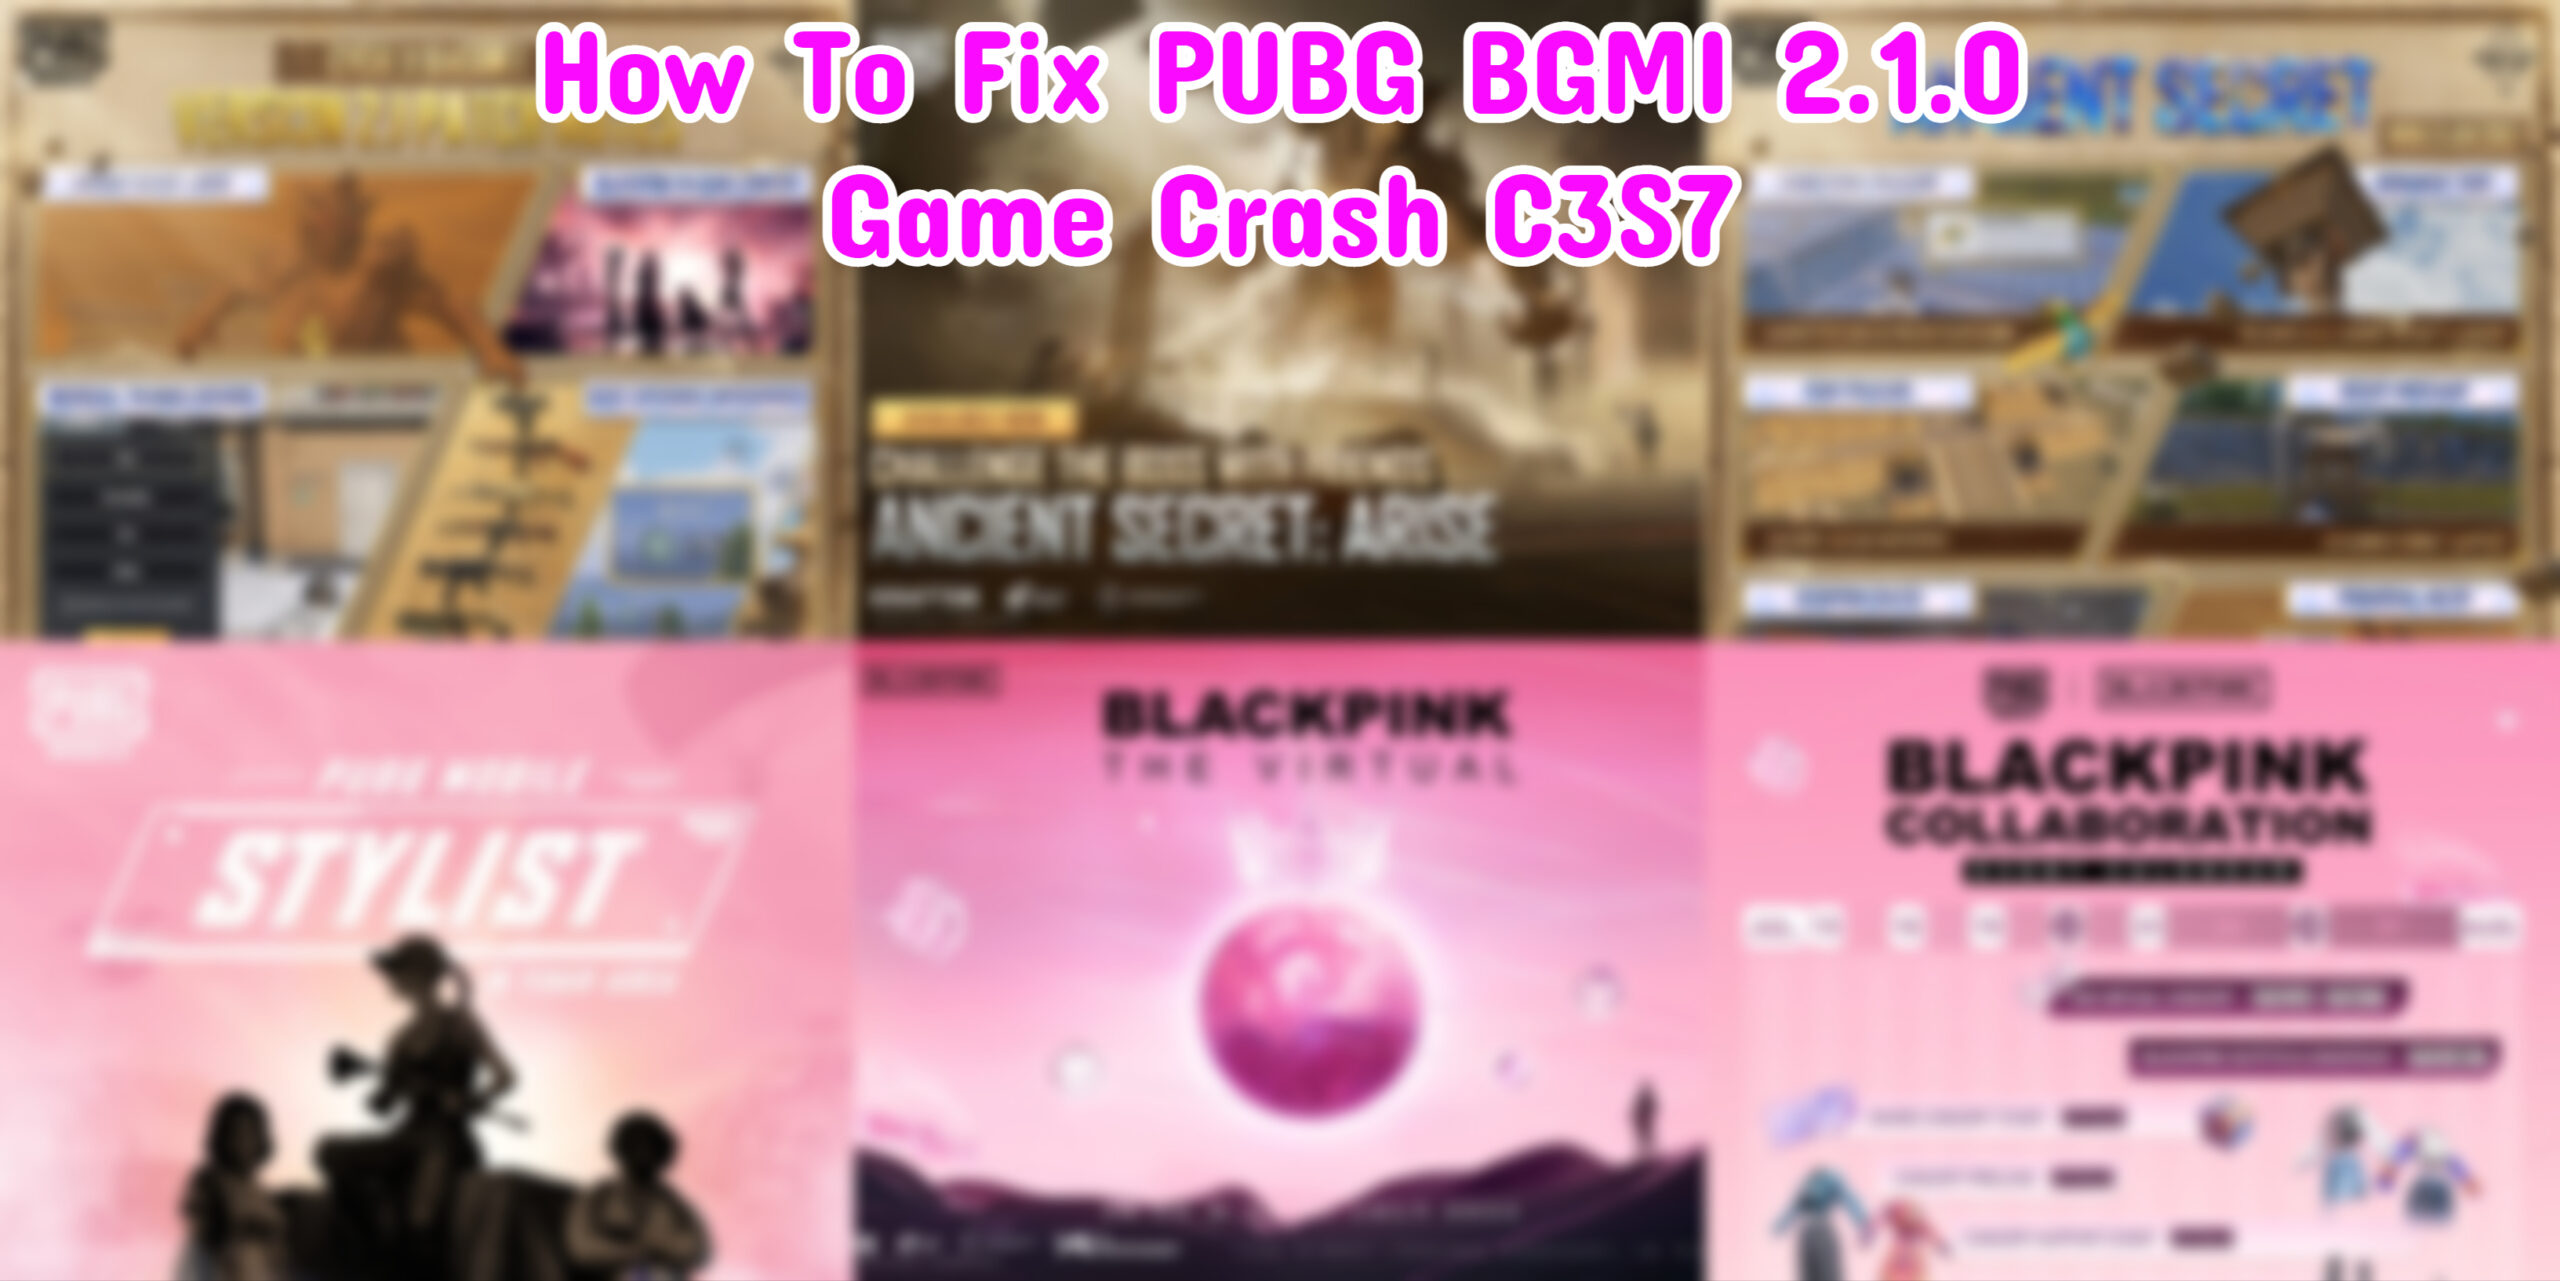 You are currently viewing How To Fix PUBG BGMI 2.1.0 Game Crash C3S7